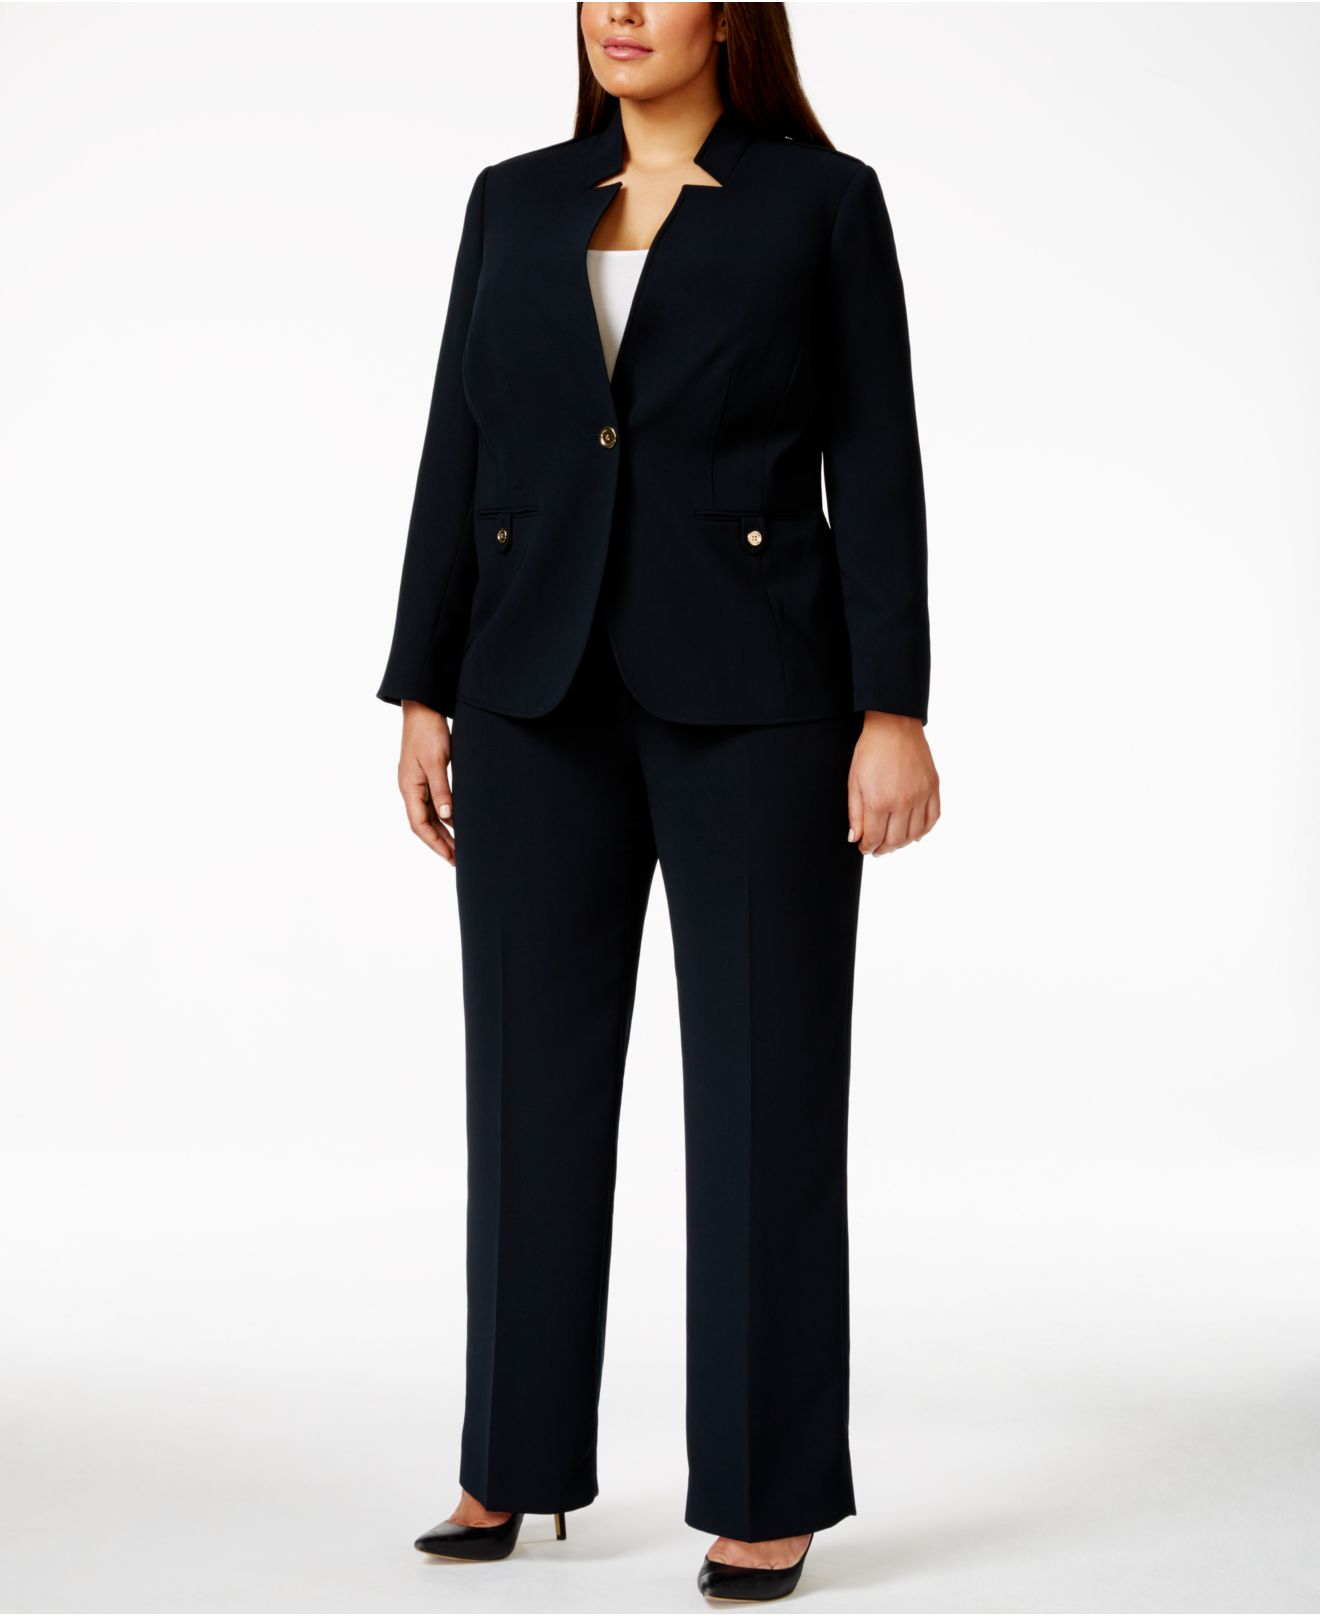 Plus Size Military-style Jacket Pant Suit in Blue | Lyst